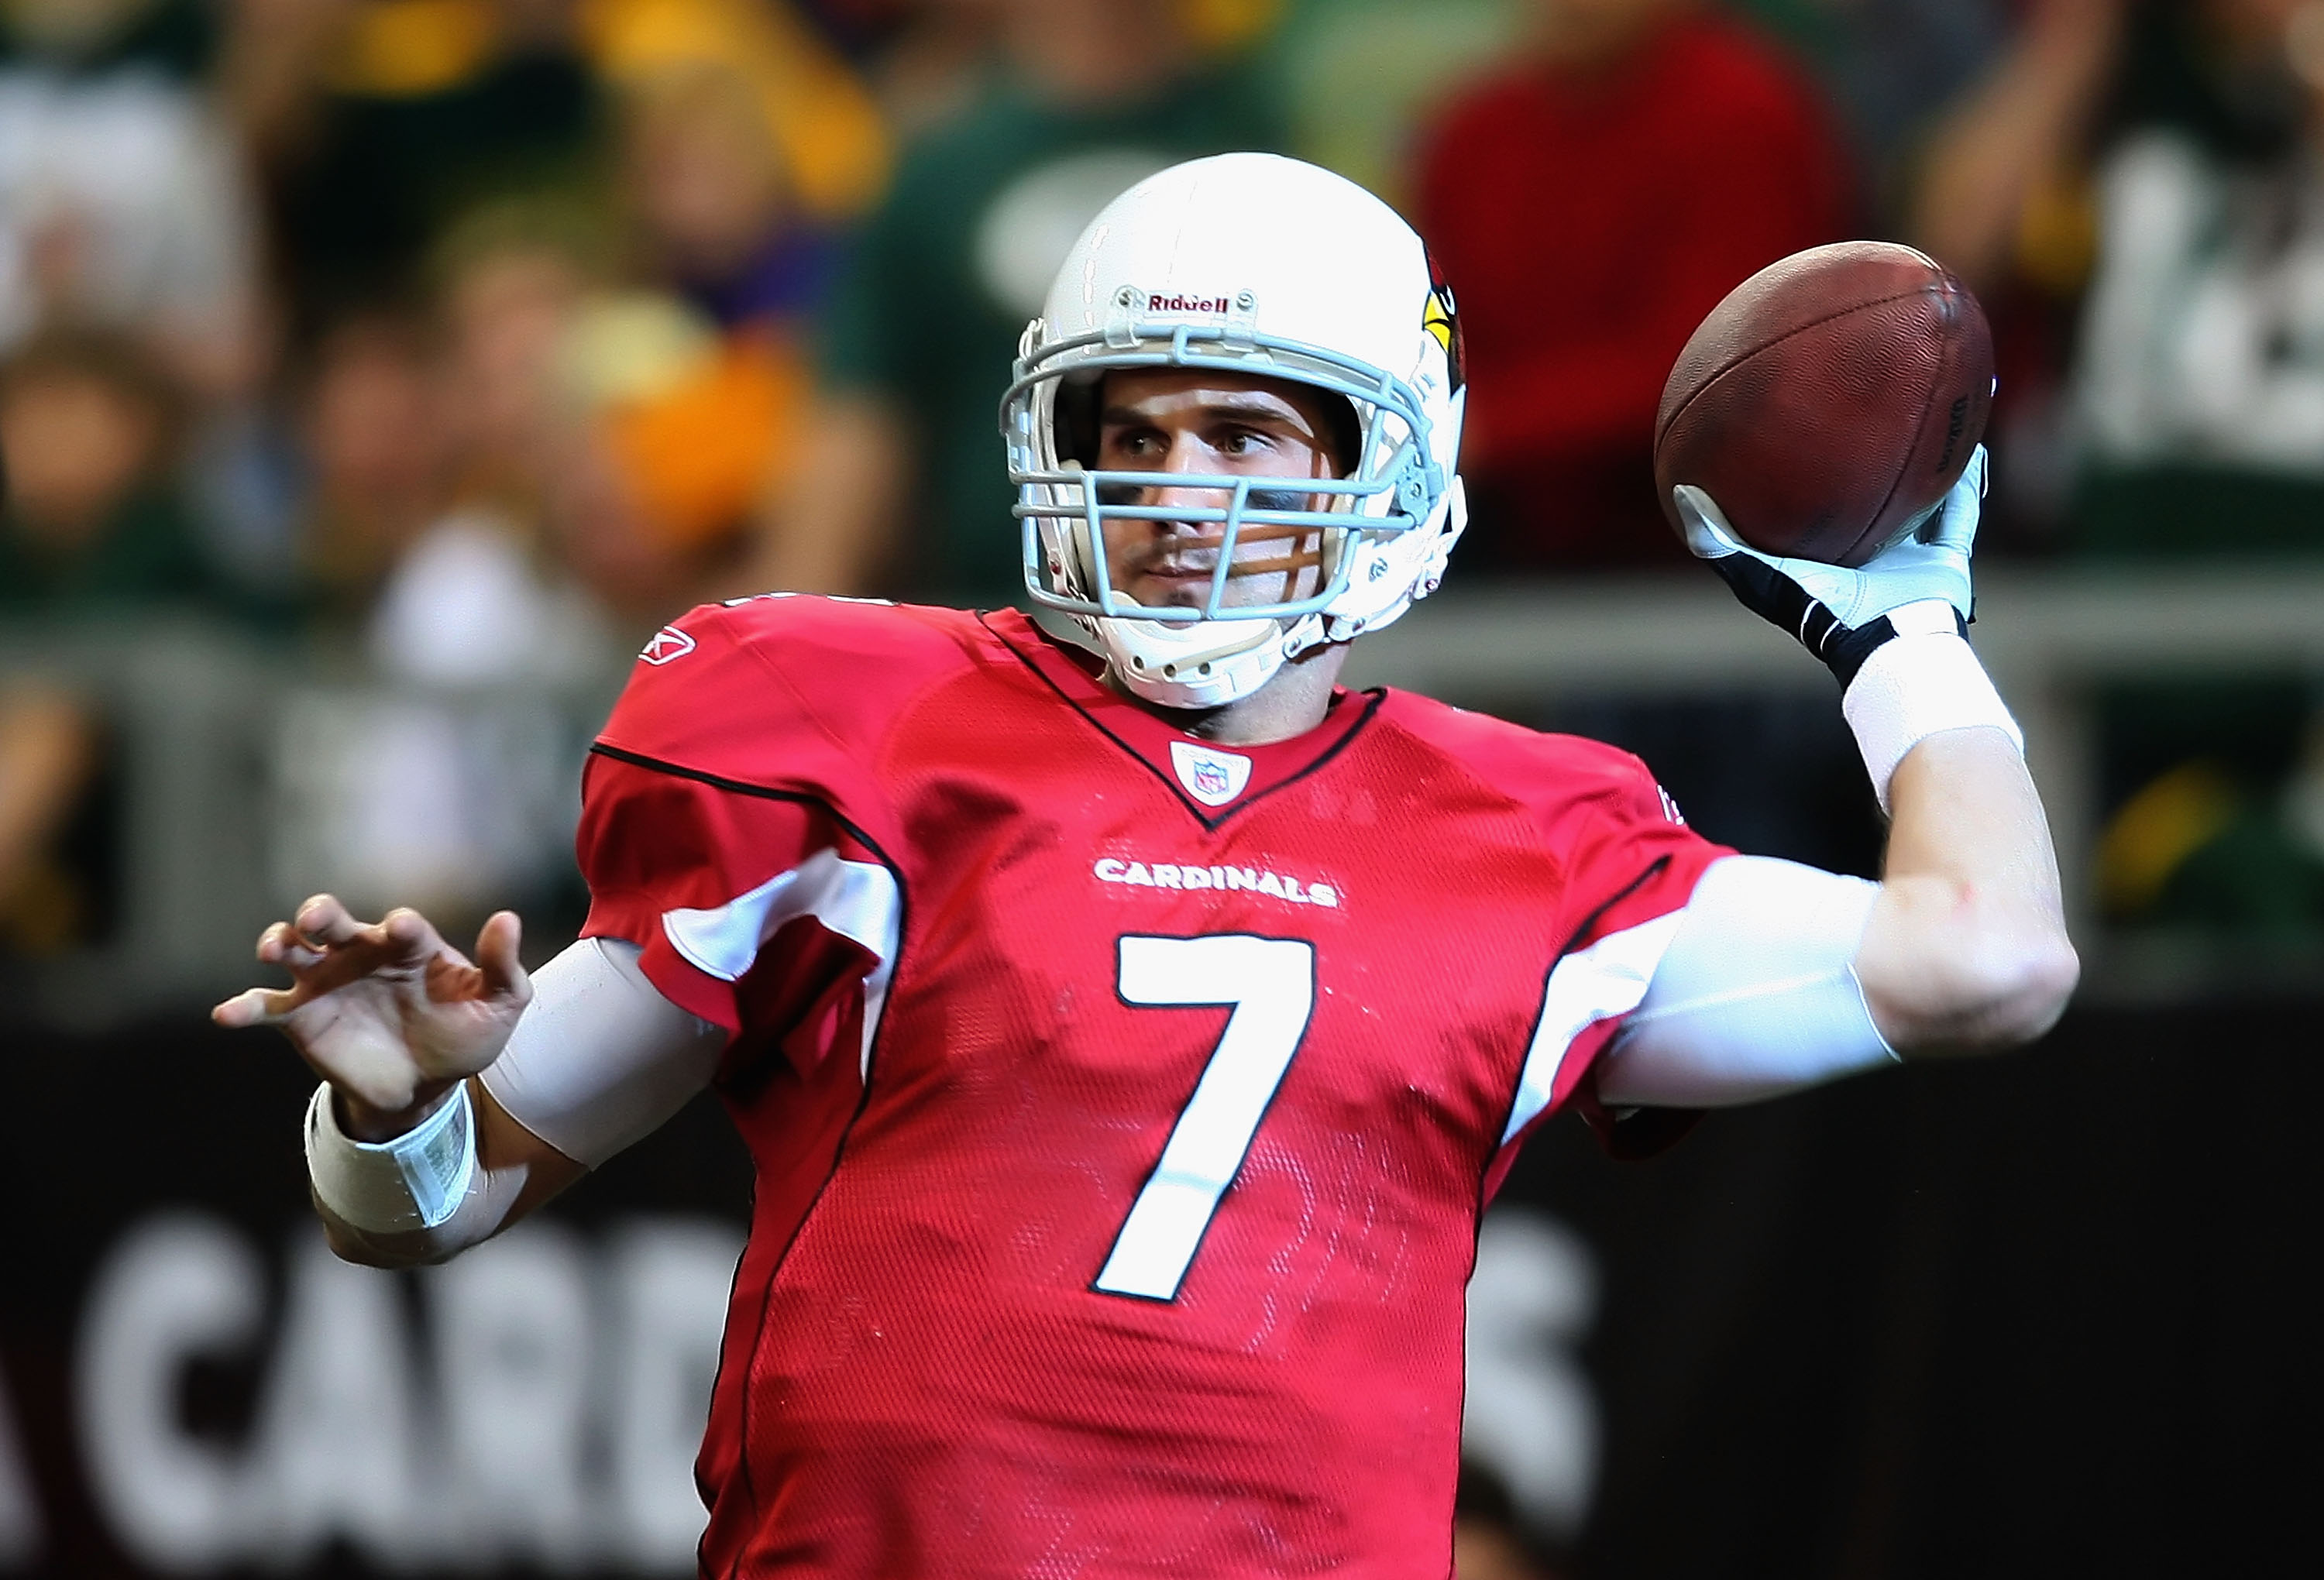 GLENDALE, AZ - JANUARY 03:  Quarterback Matt Leinart #7 of the Arizona Cardinals throws the ball against the Green Bay Packers during the NFL game at the Universtity of Phoenix Stadium on January 3, 2010 in Glendale, Arizona.  (Photo by Christian Petersen